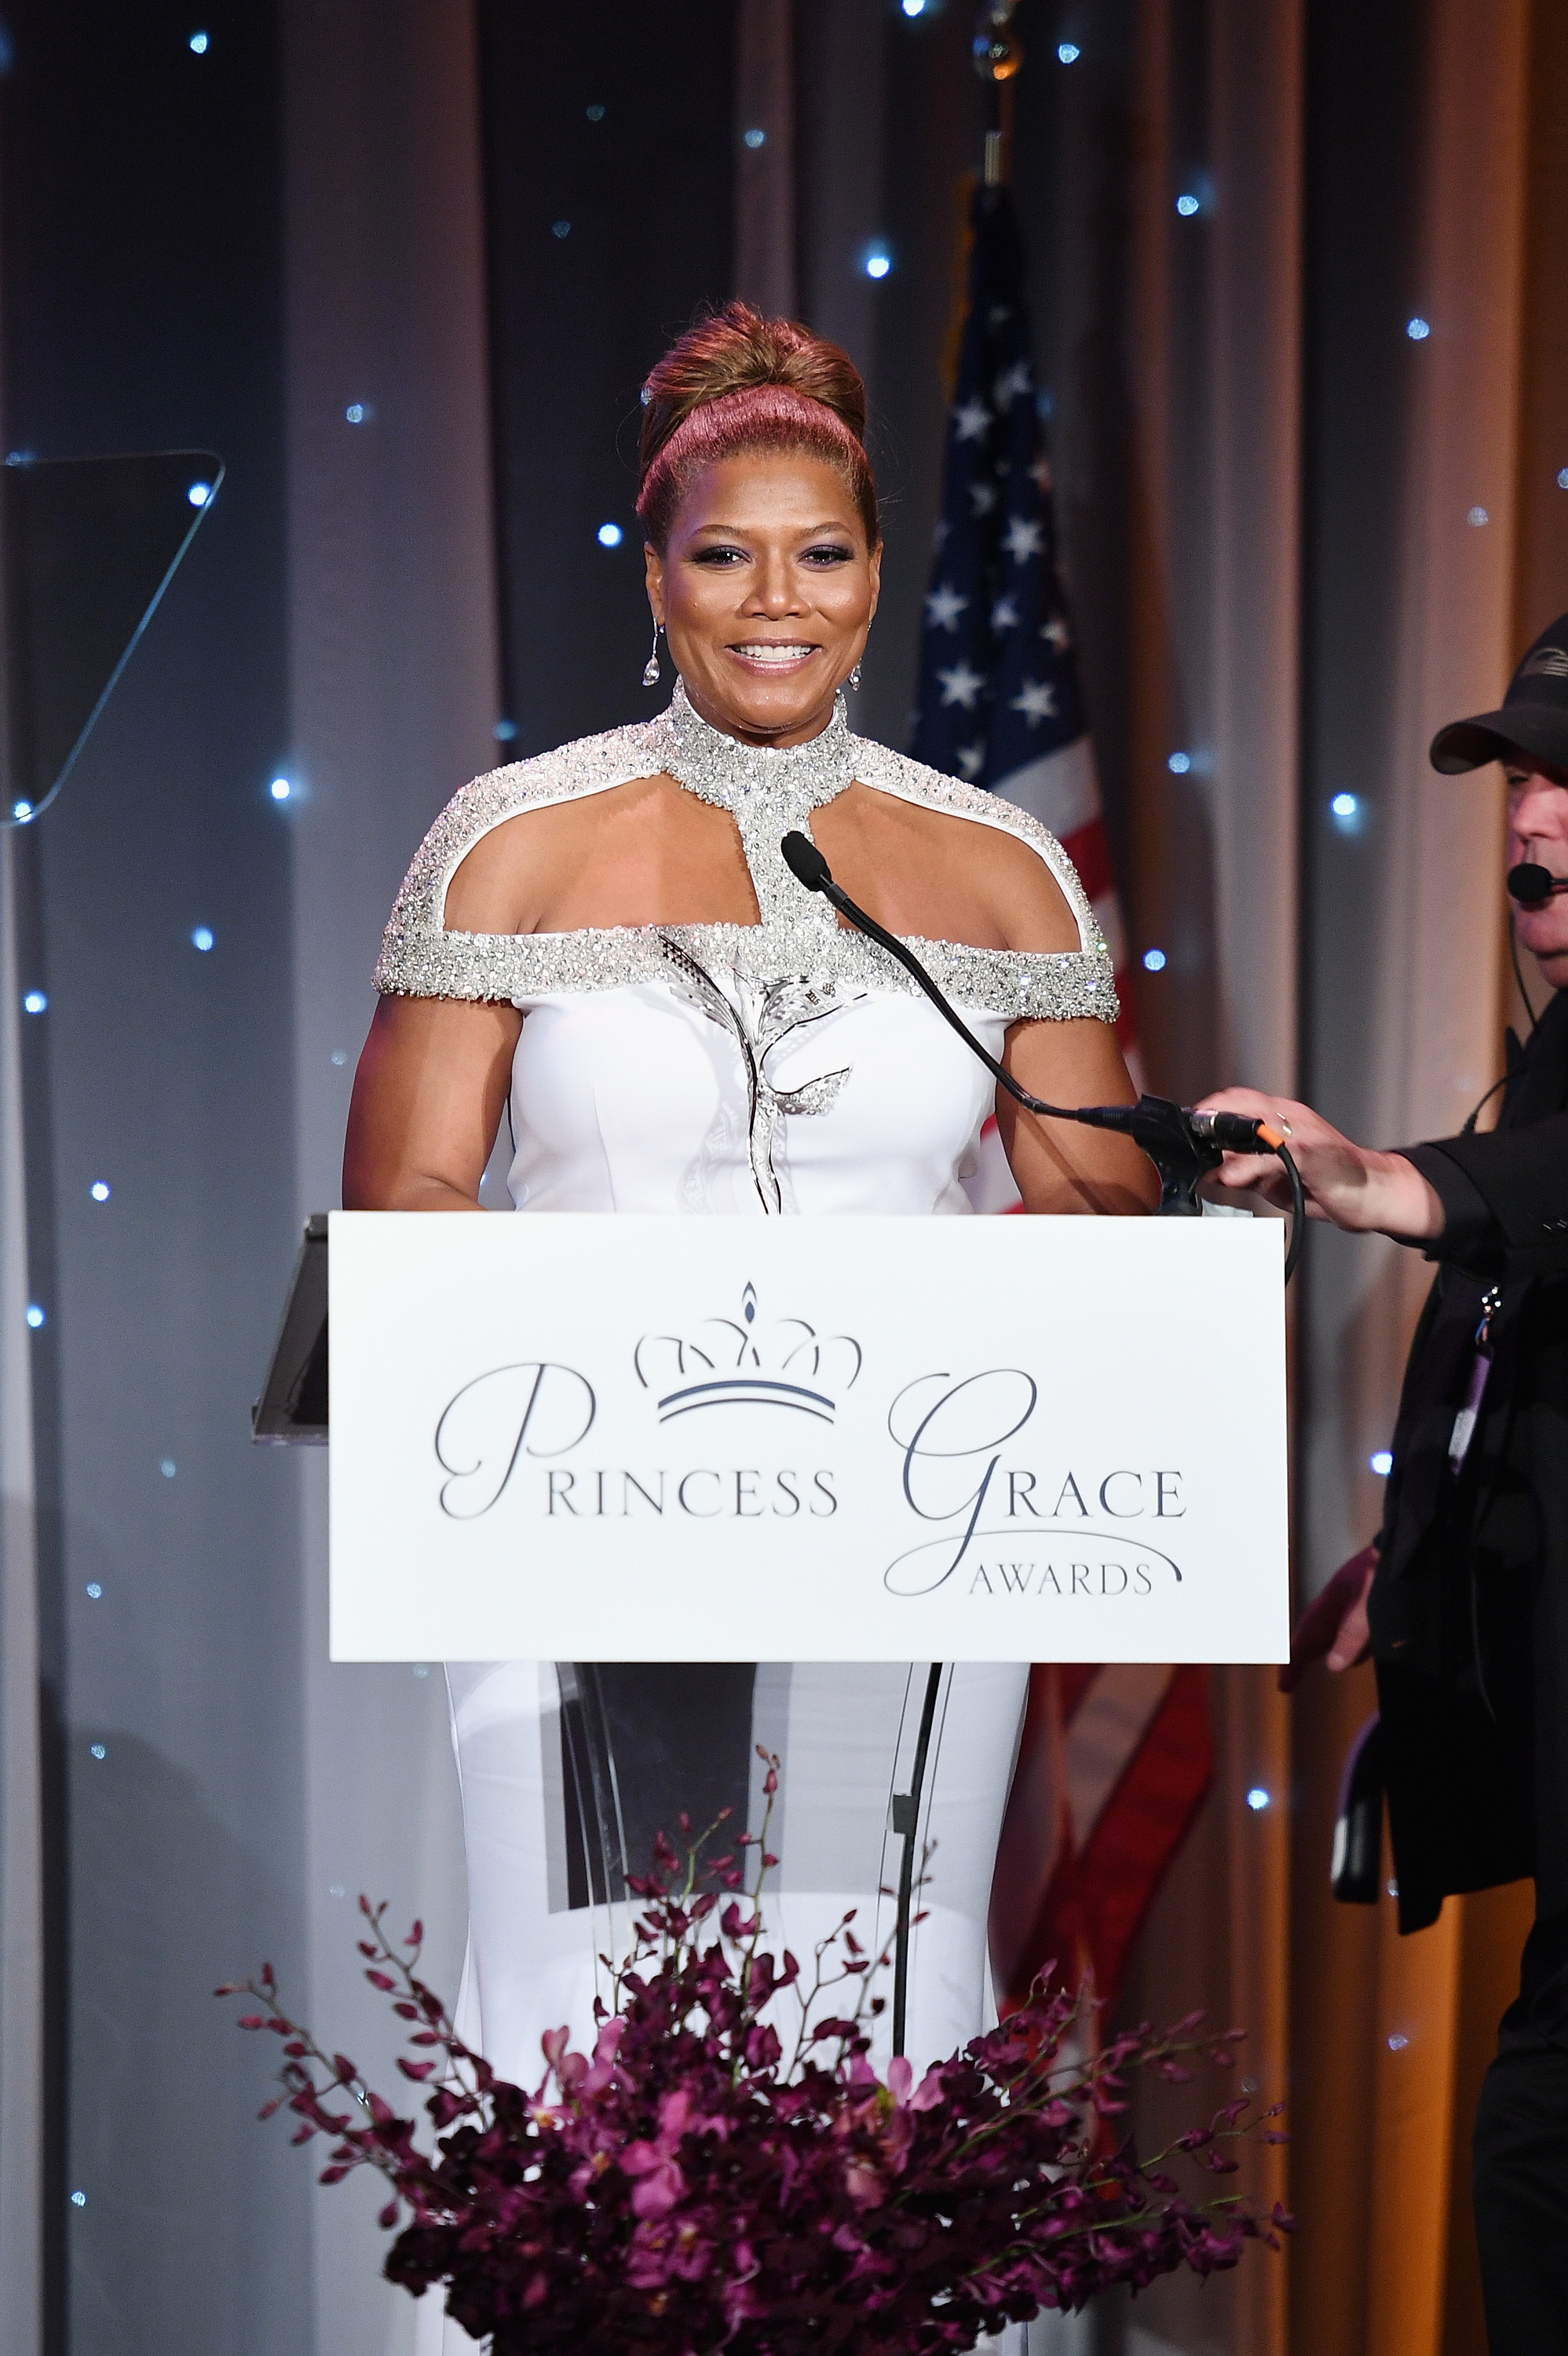 2016 Princess Grace Awards Gala With Presenting Sponsor Christian Dior Couture - Inside